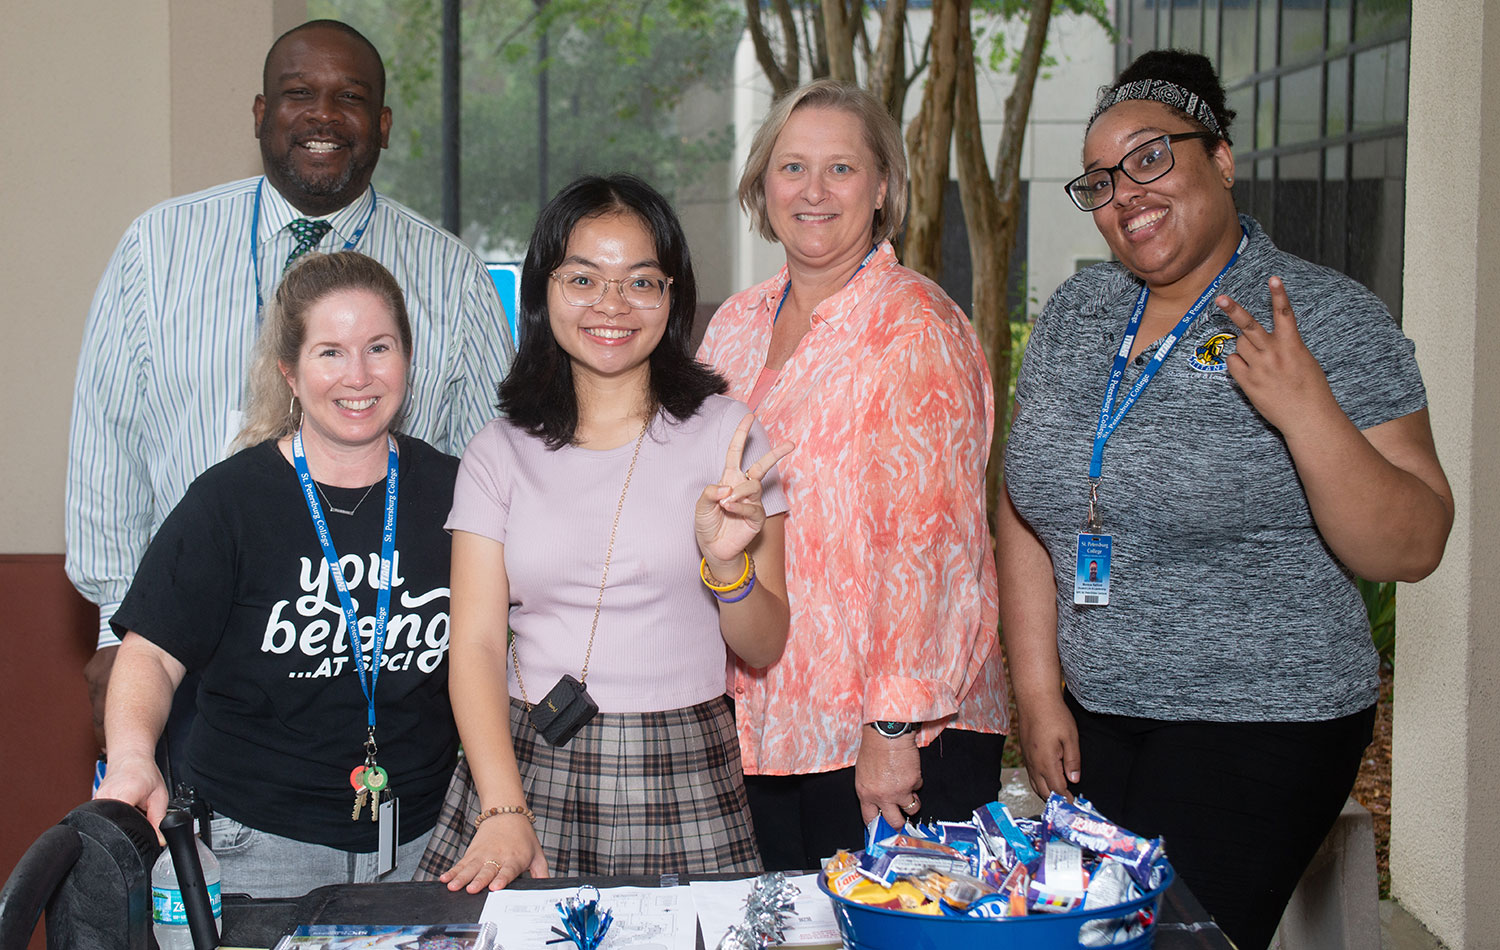 SPC staff and students pose for a picture at the Welcome Back event at the SPC Gibbs Campus.